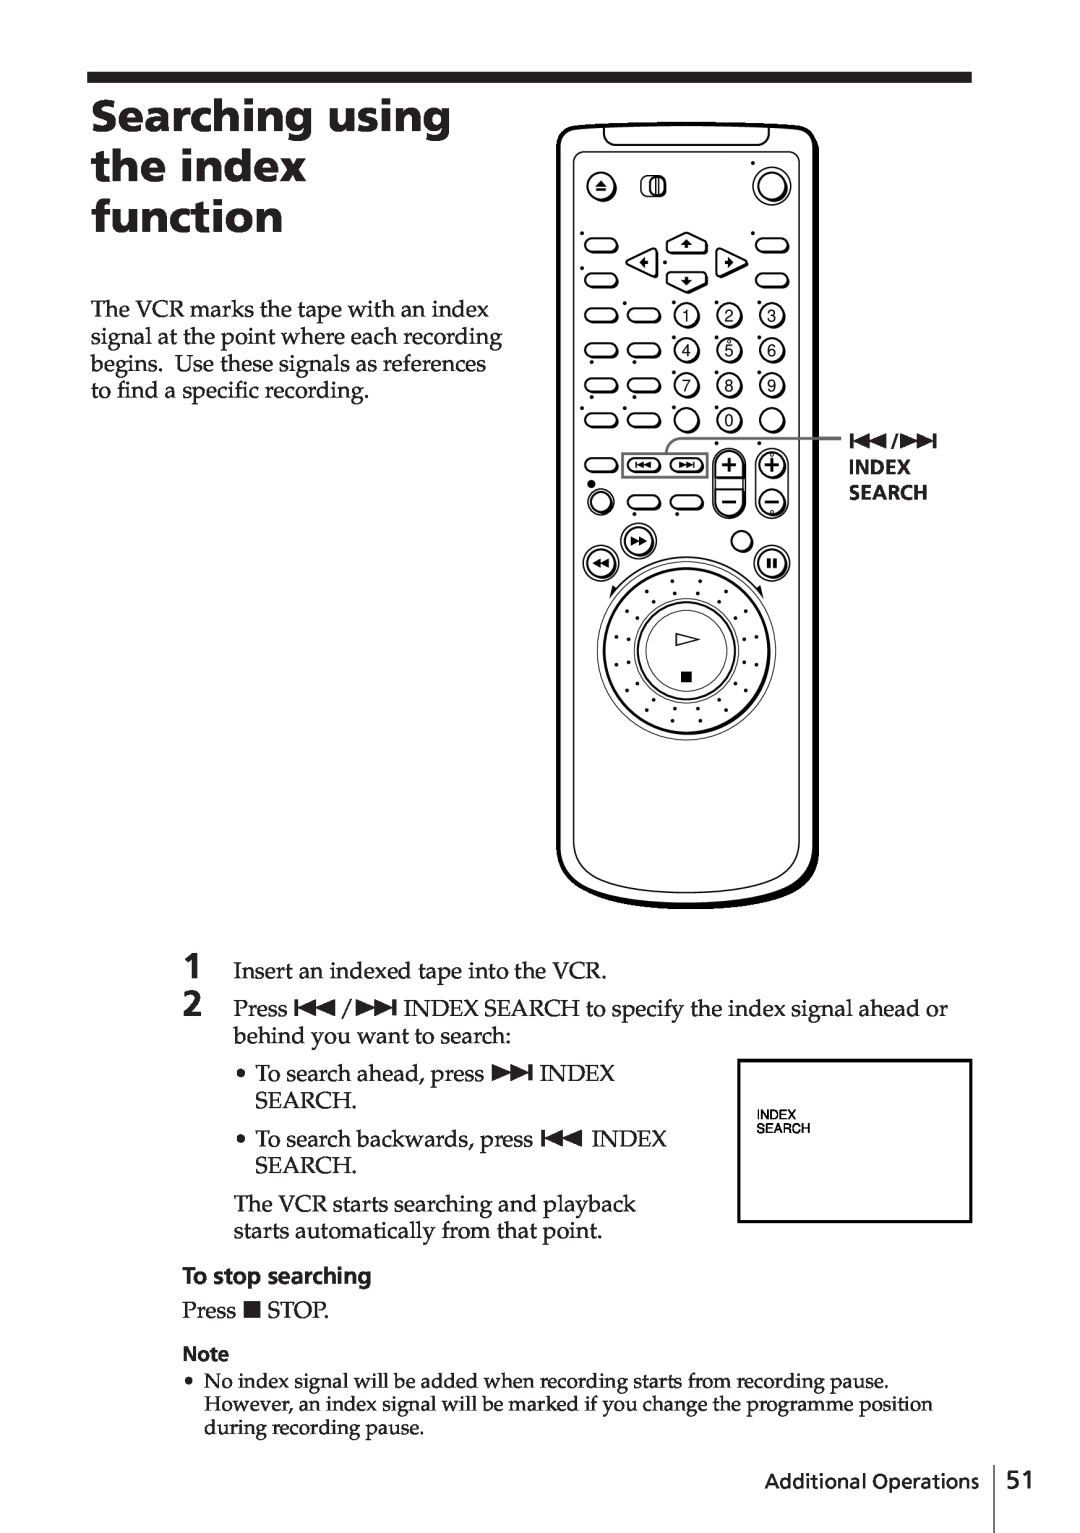 Sony SLV-E580EG manual Searching using the index function, To stop searching 